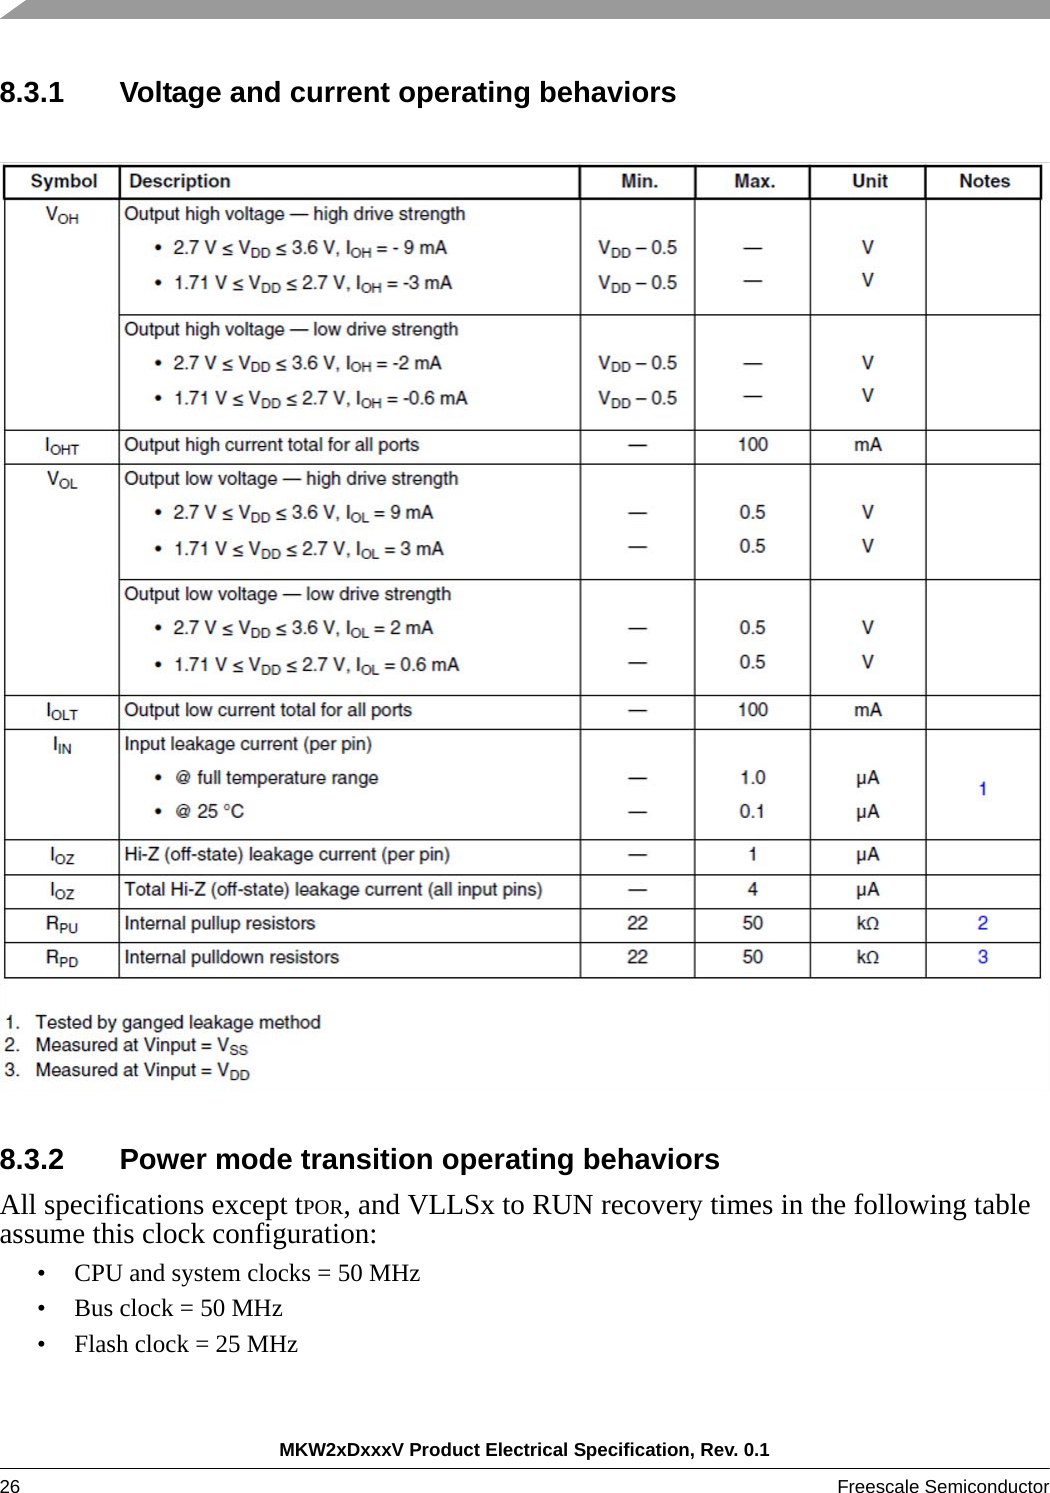 MKW2xDxxxV Product Electrical Specification, Rev. 0.126 Freescale Semiconductor 8.3.1 Voltage and current operating behaviors8.3.2 Power mode transition operating behaviorsAll specifications except tPOR, and VLLSx to RUN recovery times in the following table assume this clock configuration:• CPU and system clocks = 50 MHz• Bus clock = 50 MHz• Flash clock = 25 MHz